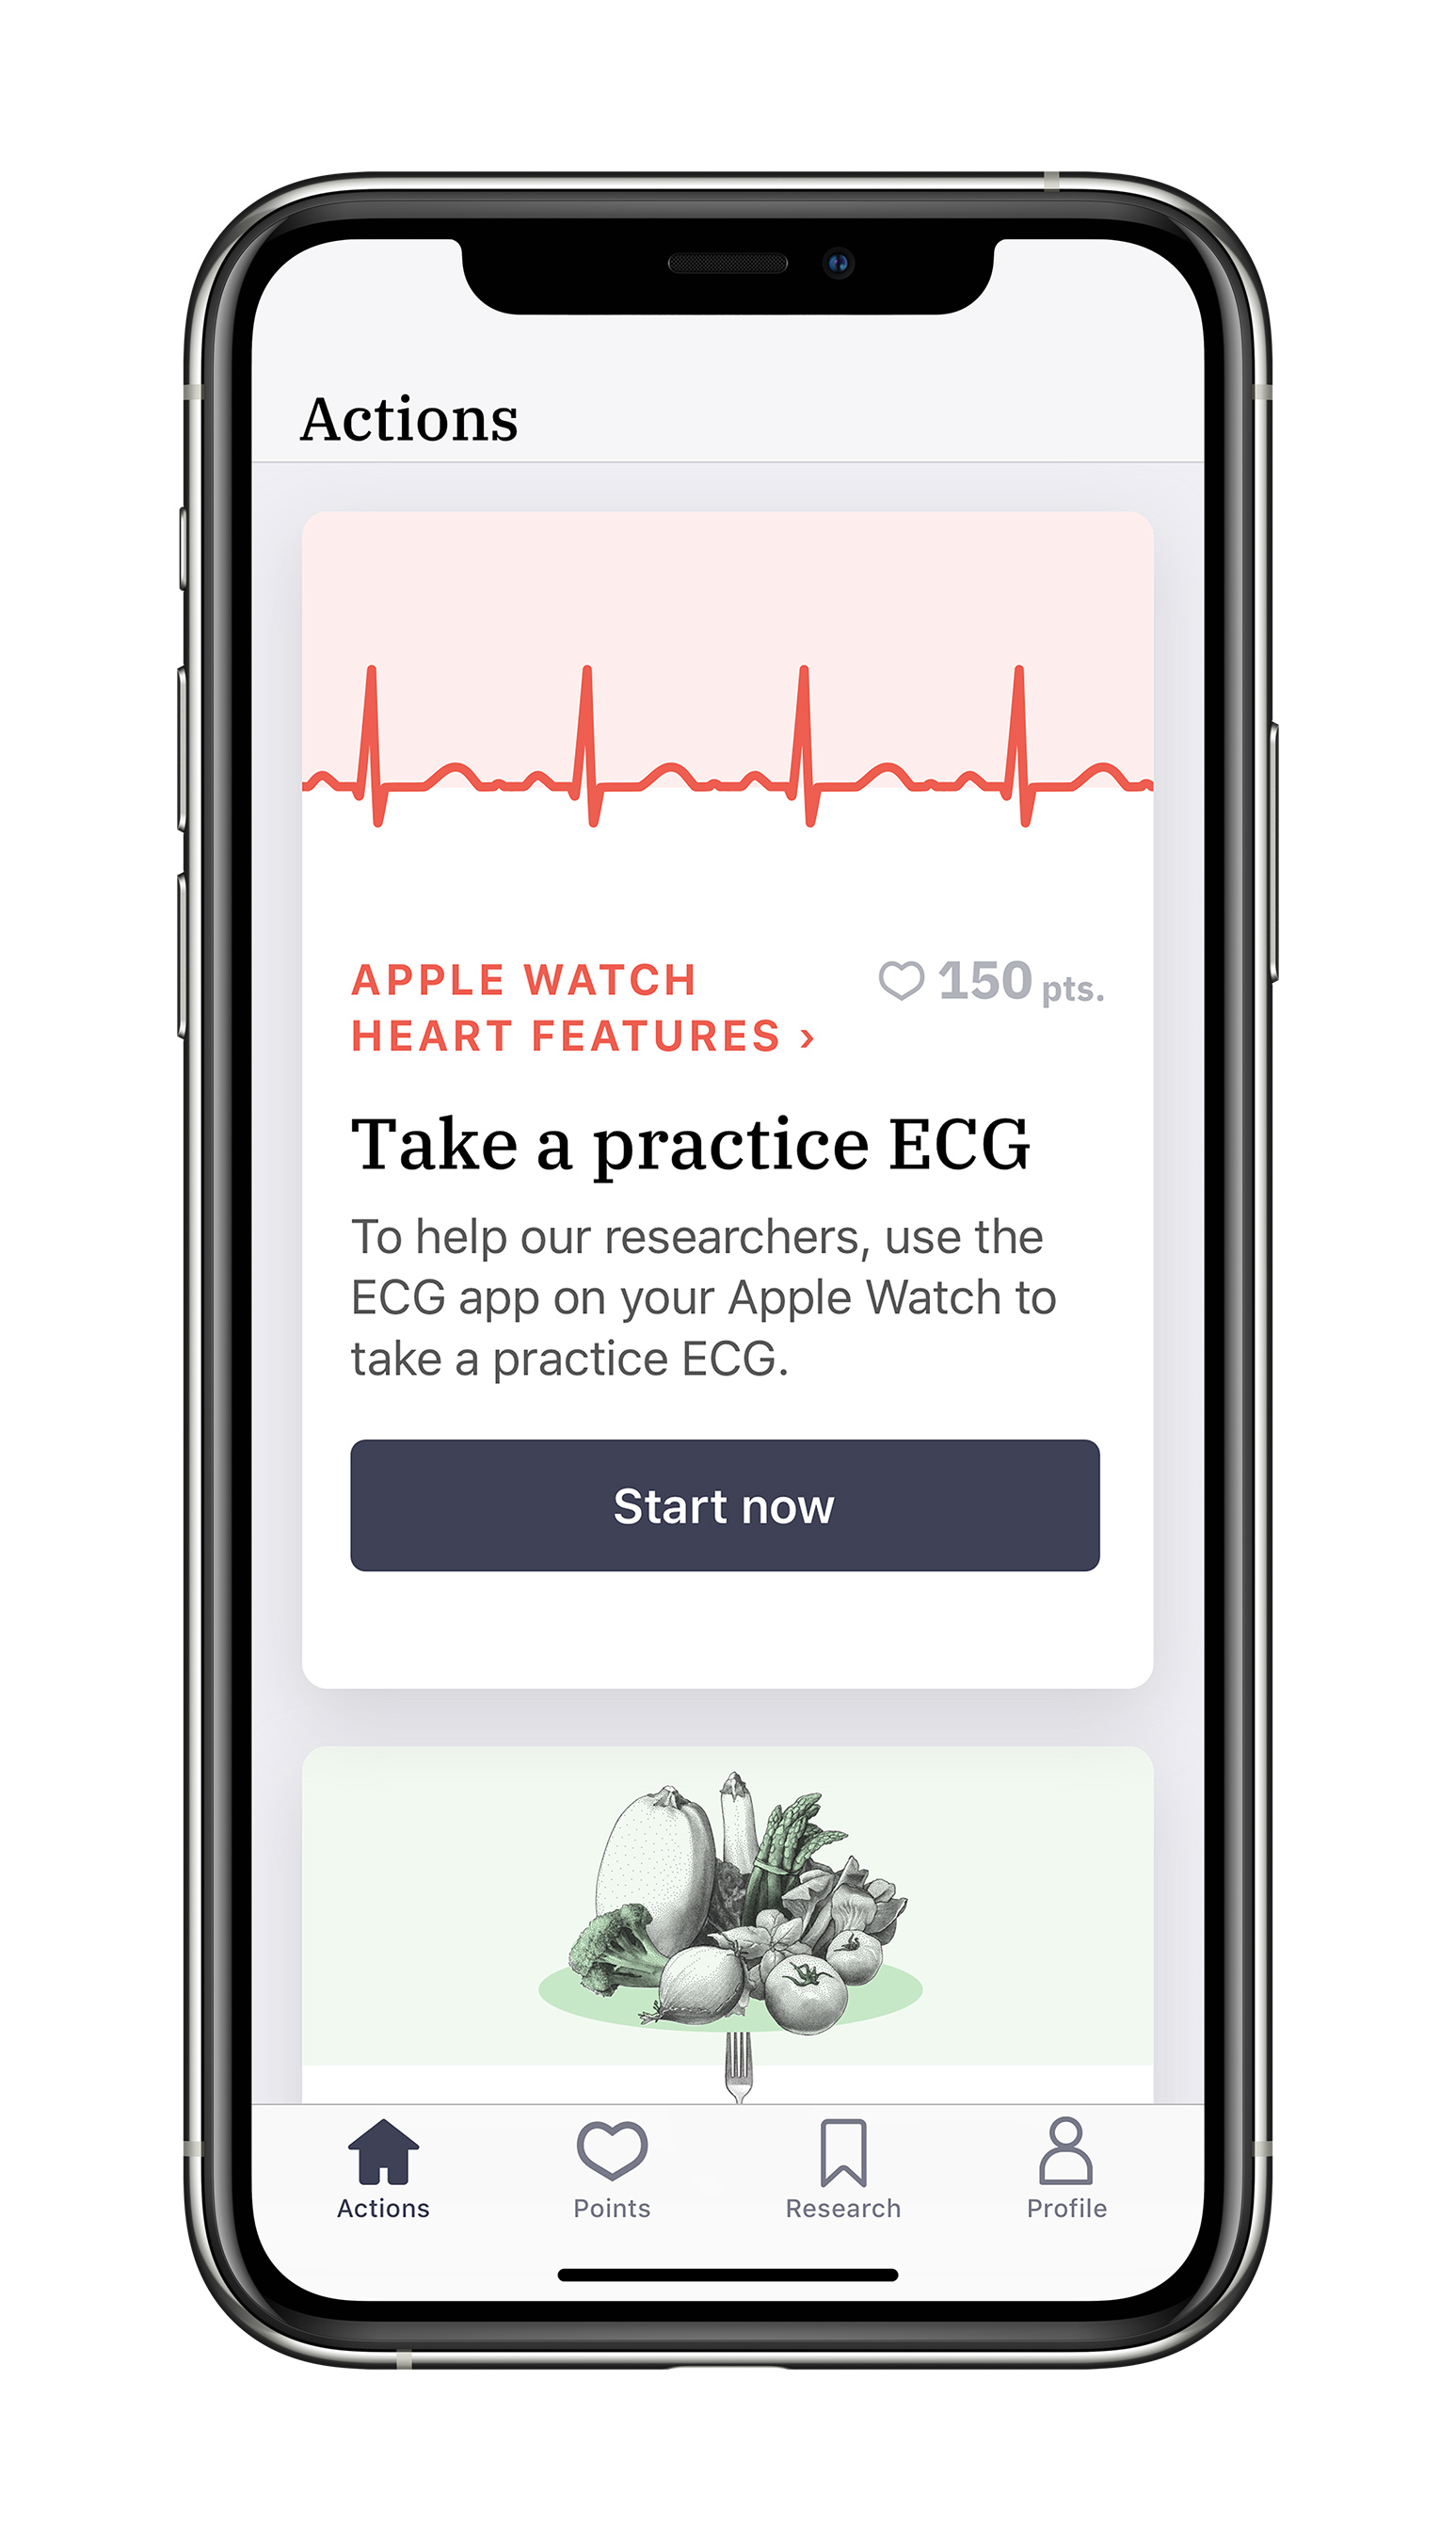 Study participation will help researchers understand whether the Heartline™ Study app and heart health features on Apple Watch can help with earlier detection of AFib and improve overall health outcomes.